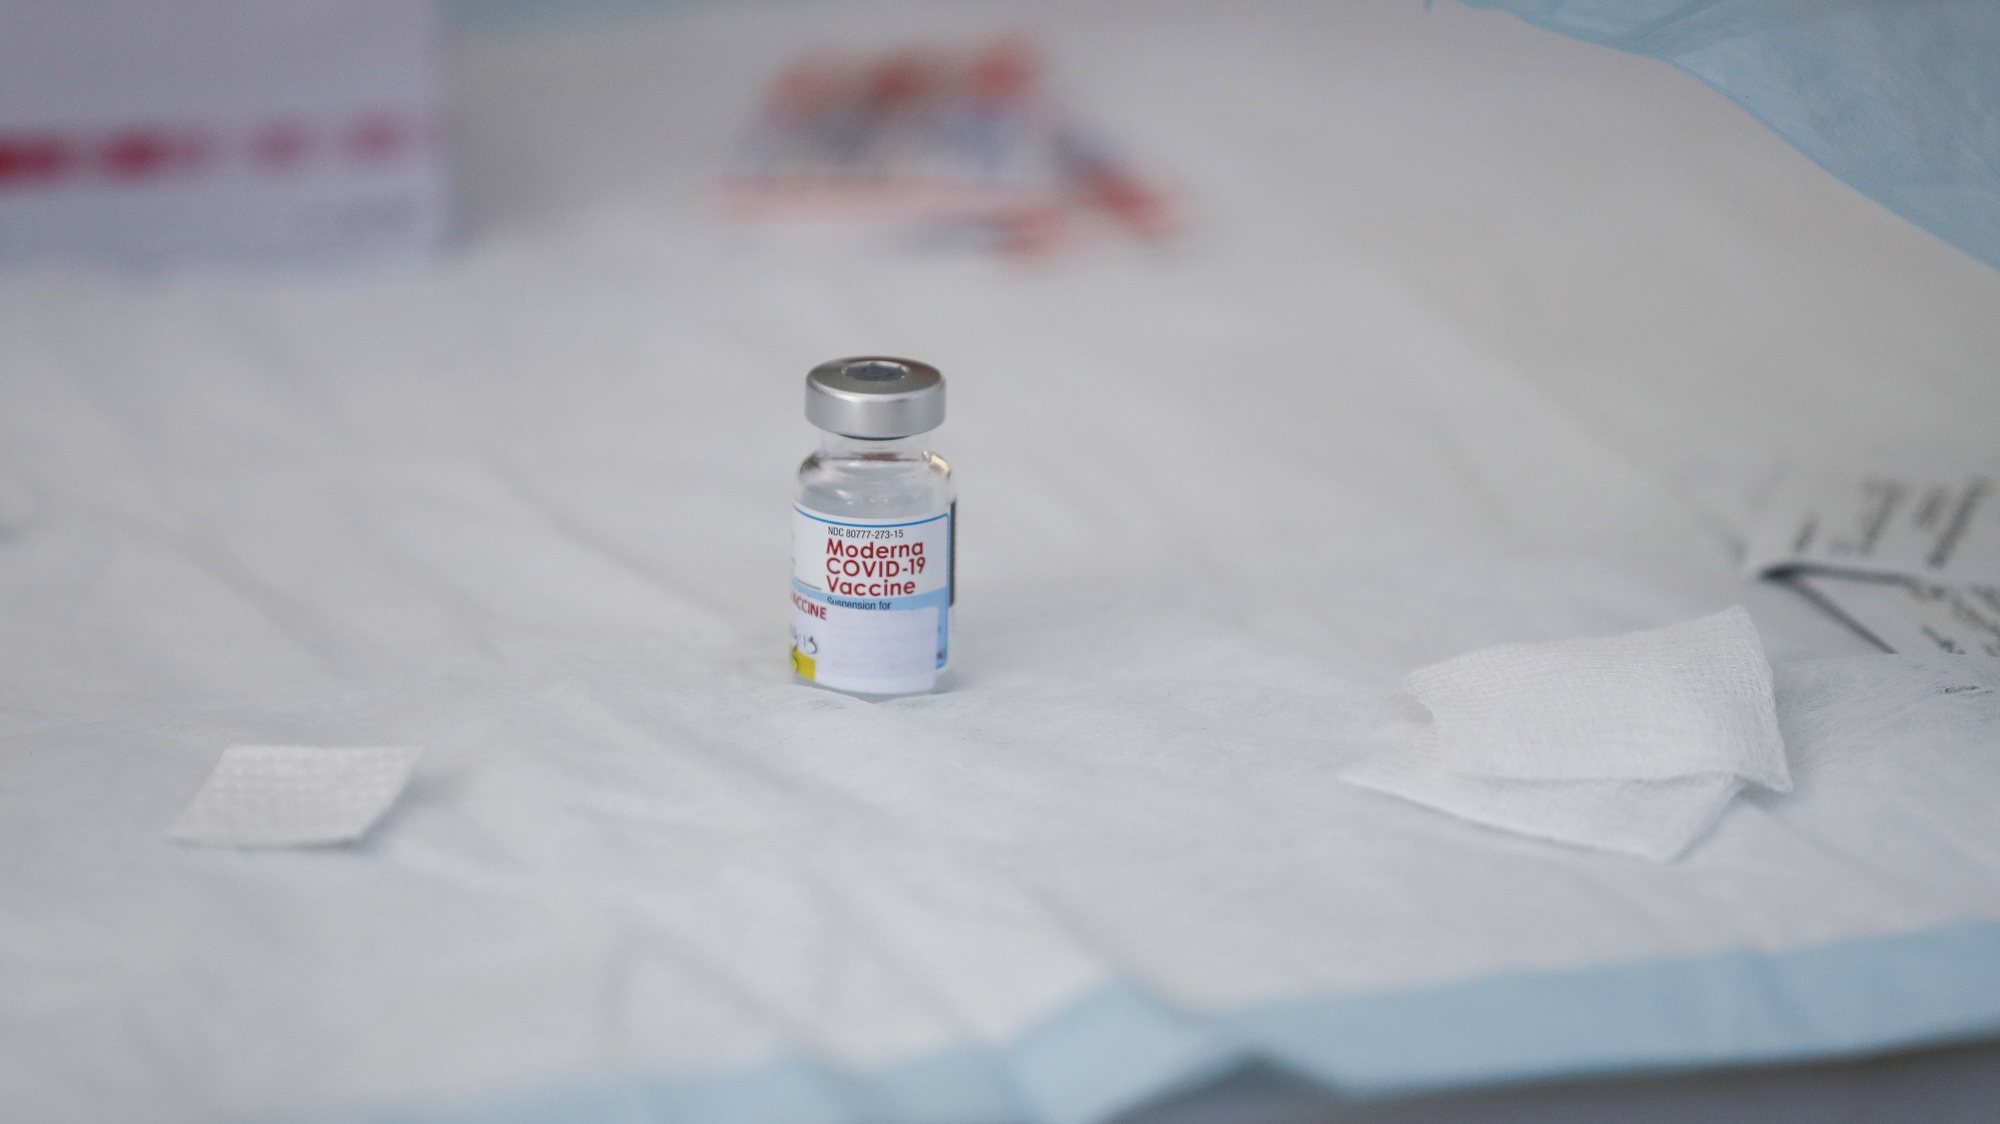 epa09482475 A vial containing Moderna Covid-19 vaccine sits on a table at a clinic for individuals experiencing homelessness at San Julian Park in Los Angeles, California, USA, 22 September 2021.  EPA/CAROLINE BREHMAN